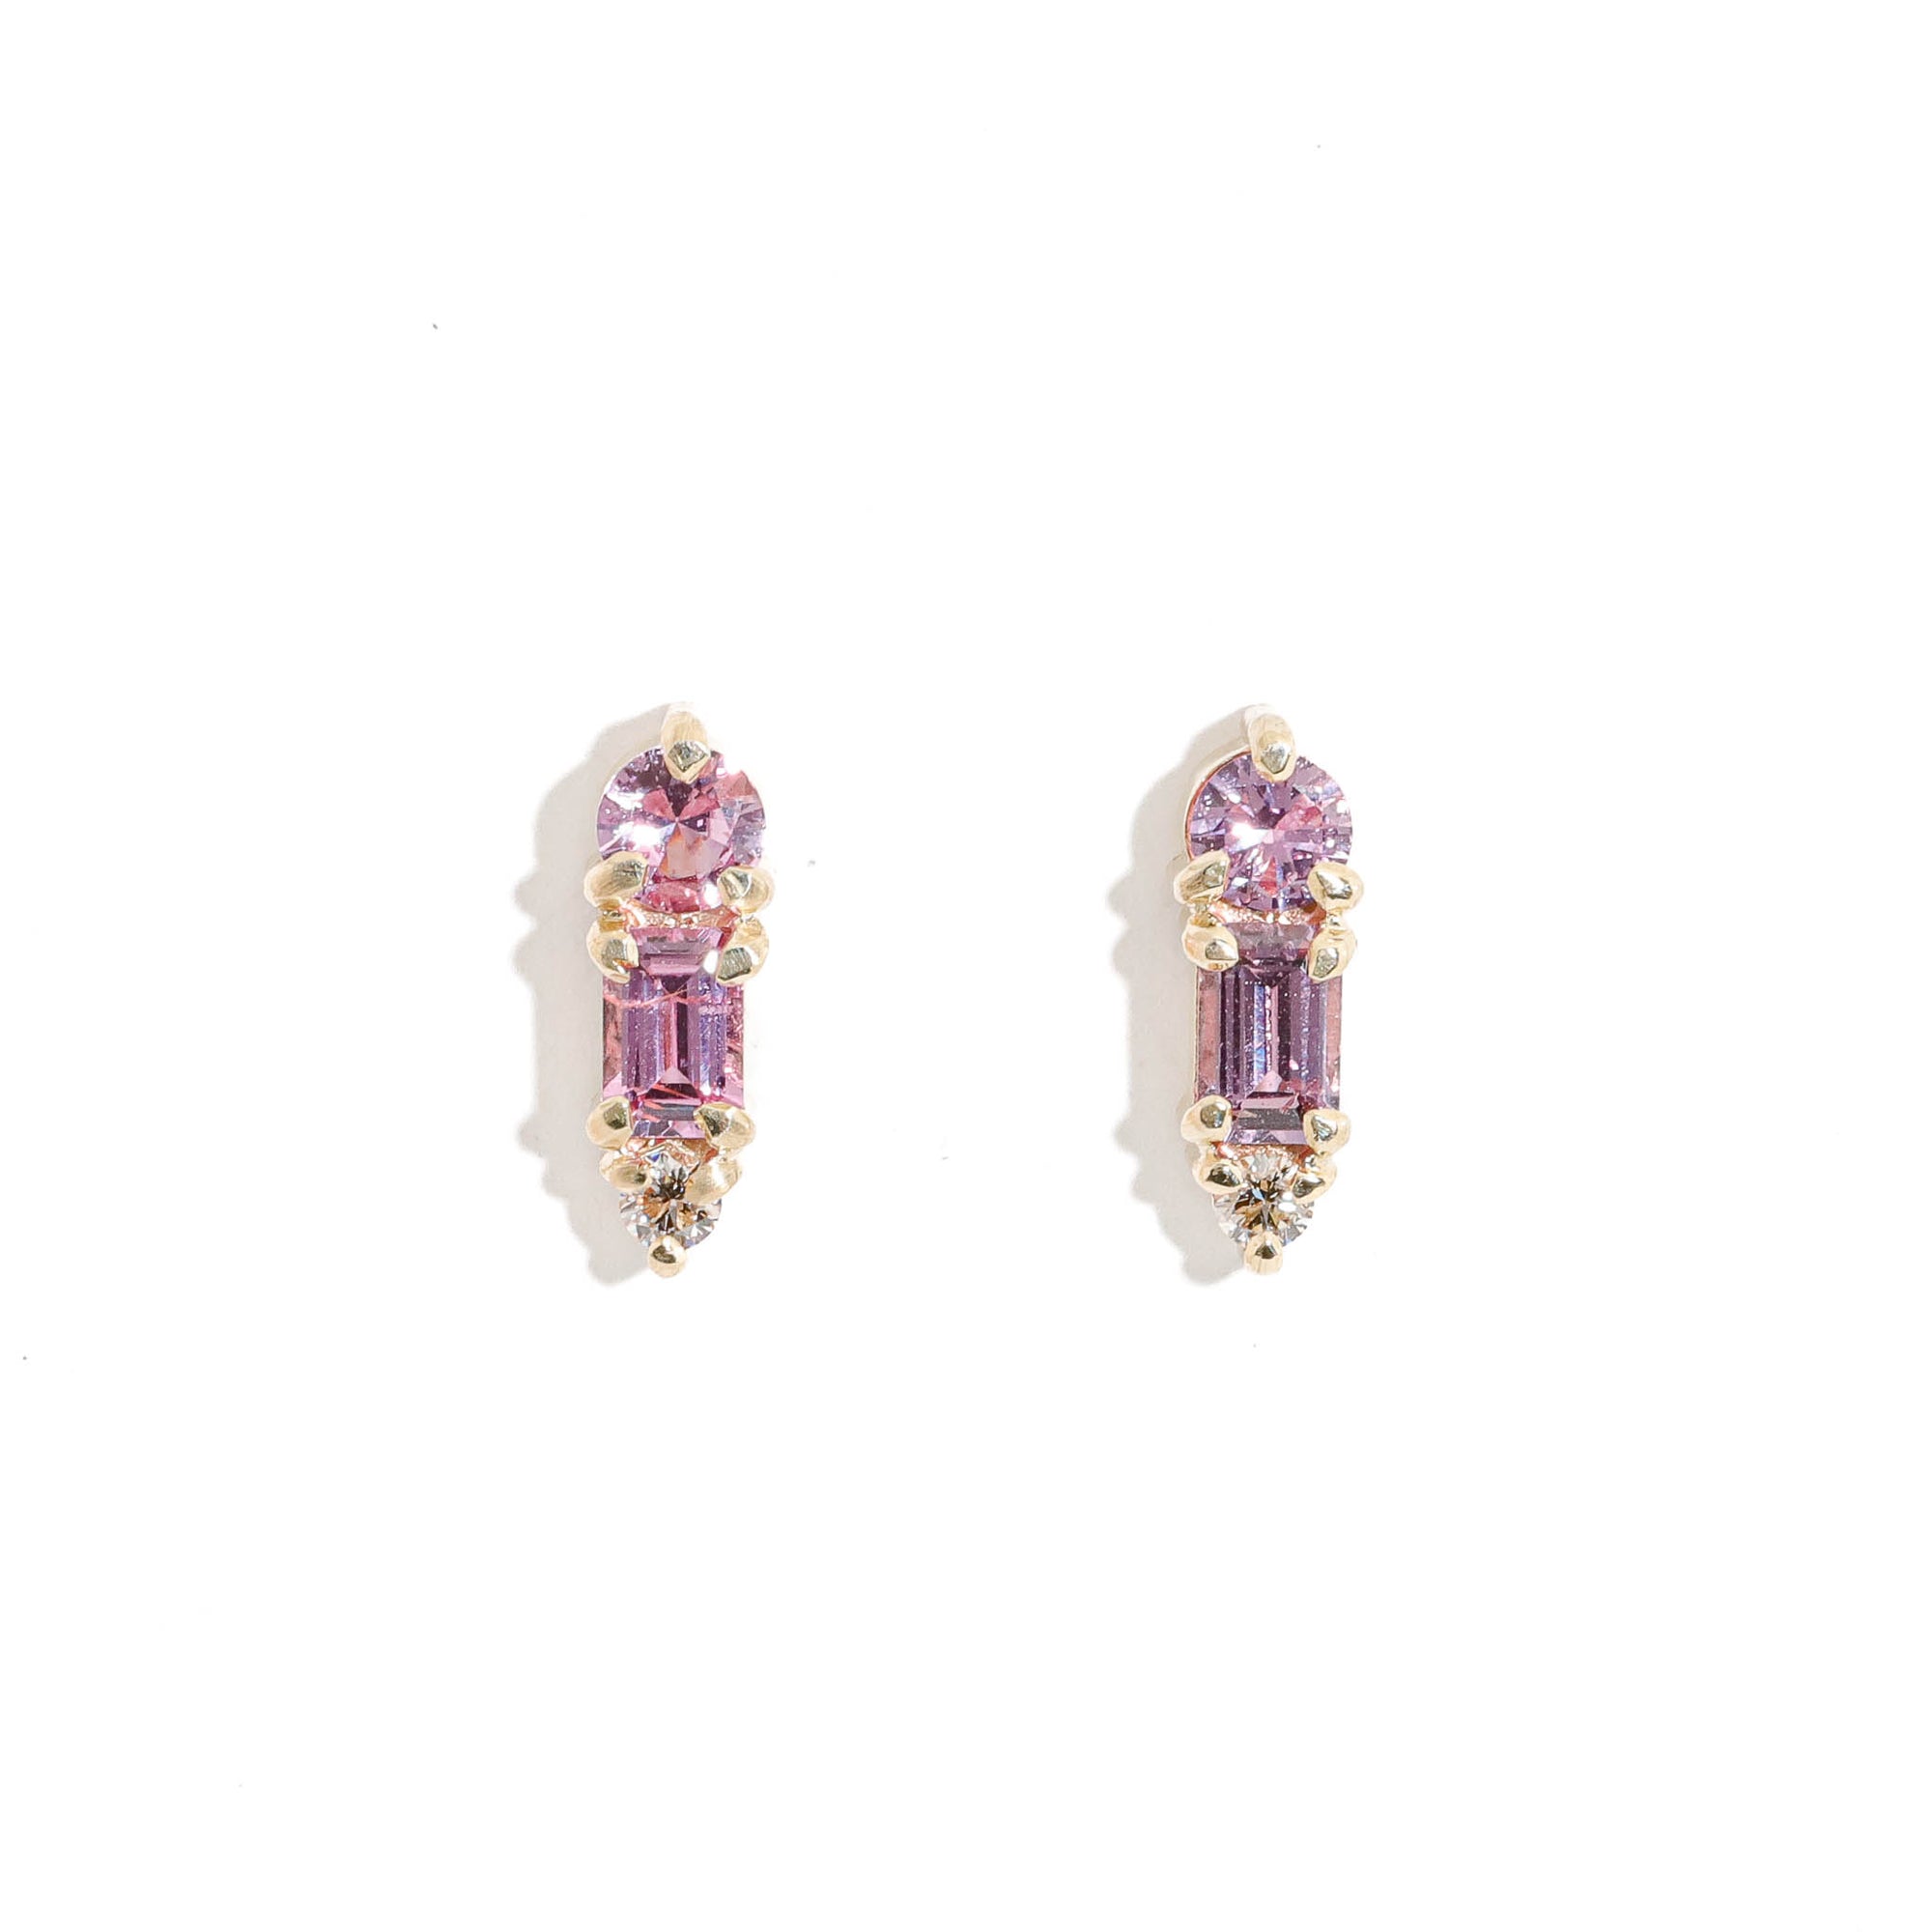 Three Stone Round Cut Pink Sapphires and a Round Cut Champagne Diamond Drop Earrings in 9 Carat Yellow Gold 